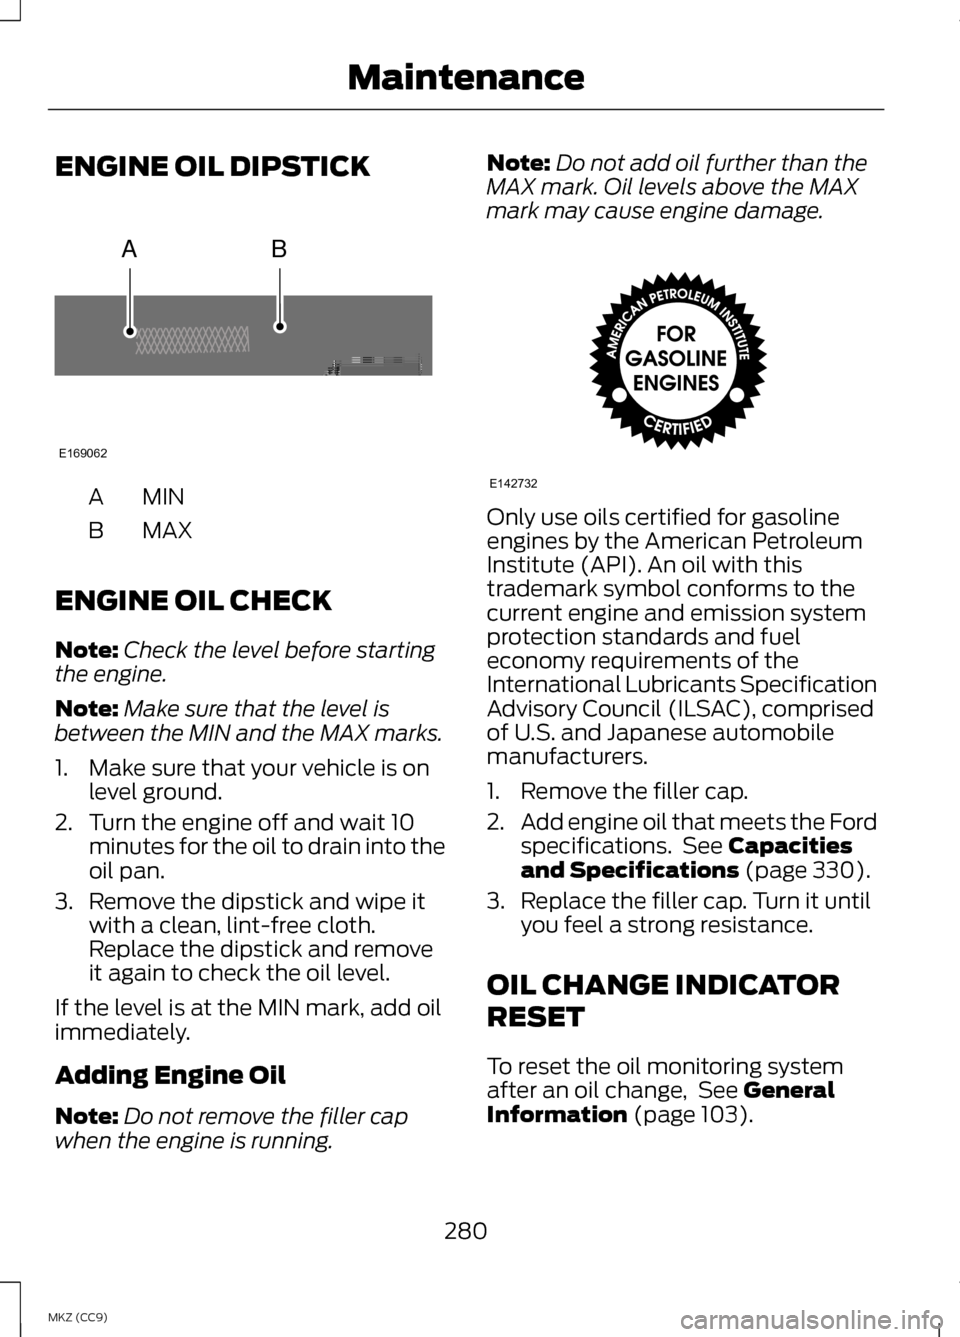 LINCOLN MKZ HYBRID 2013  Owners Manual ENGINE OIL DIPSTICK
MINA
MAXB
ENGINE OIL CHECK
Note: Check the level before starting
the engine.
Note: Make sure that the level is
between the MIN and the MAX marks.
1. Make sure that your vehicle is 